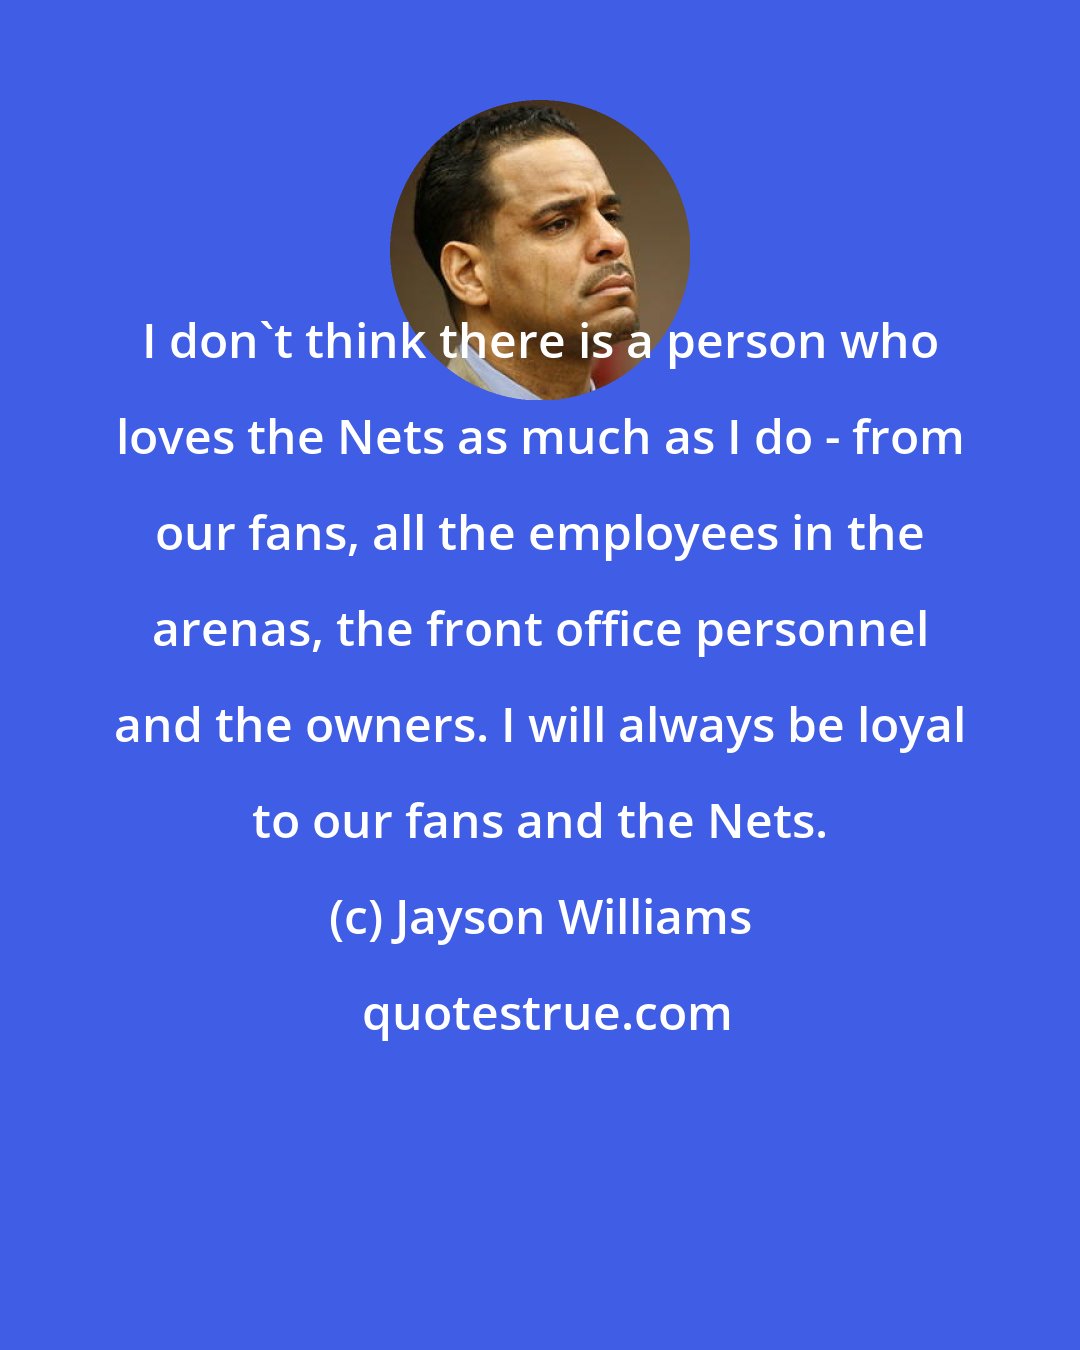 Jayson Williams: I don't think there is a person who loves the Nets as much as I do - from our fans, all the employees in the arenas, the front office personnel and the owners. I will always be loyal to our fans and the Nets.